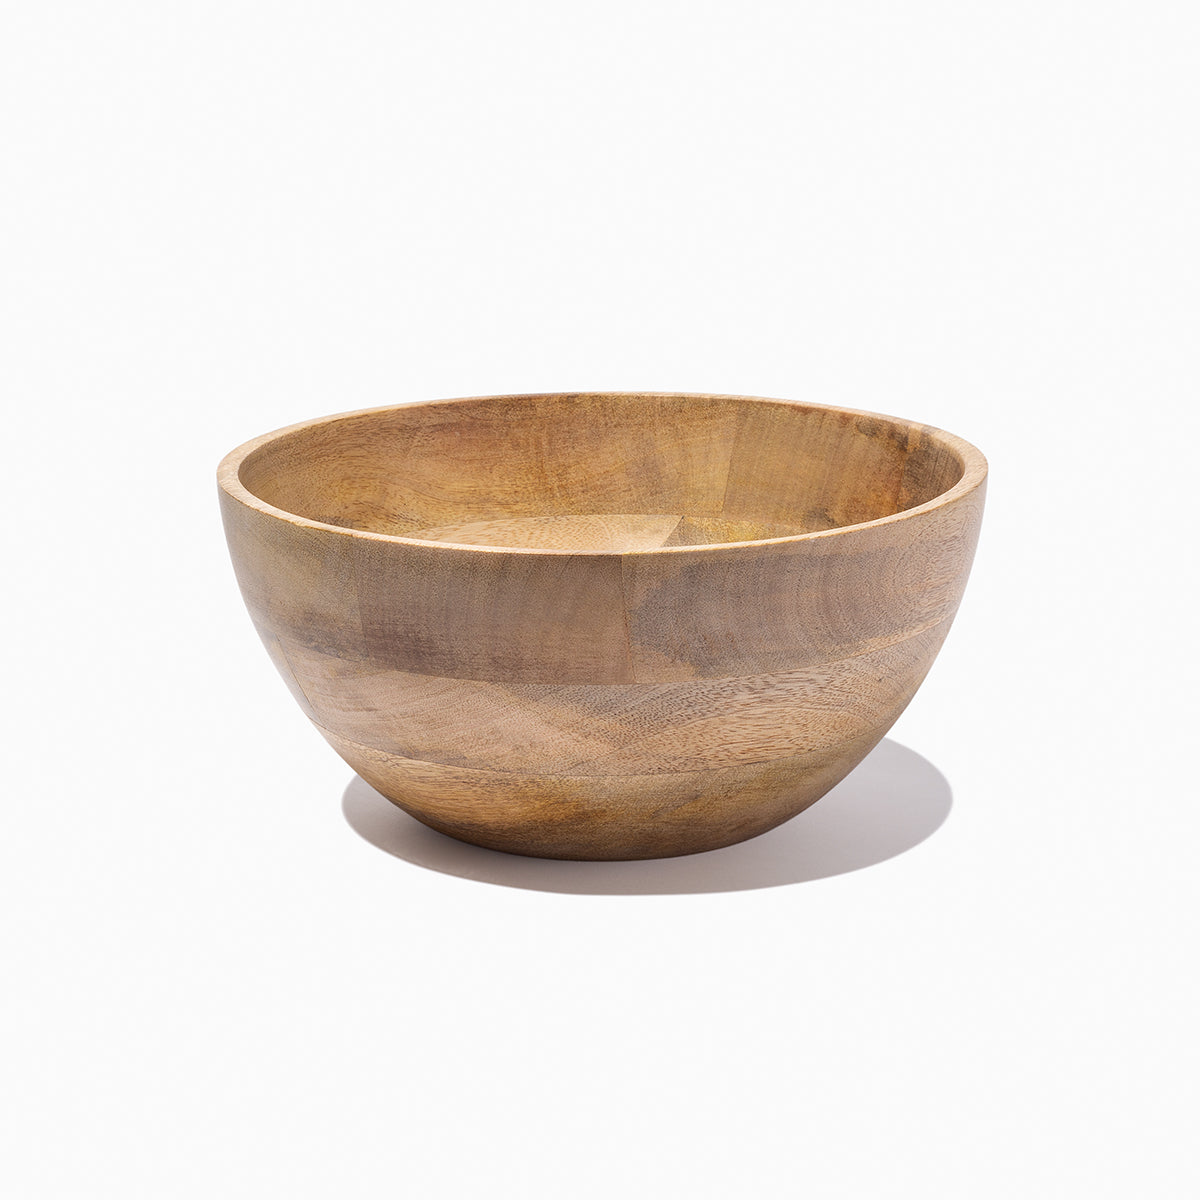 Wooden Bowl | Product Image | Uncommon James Home